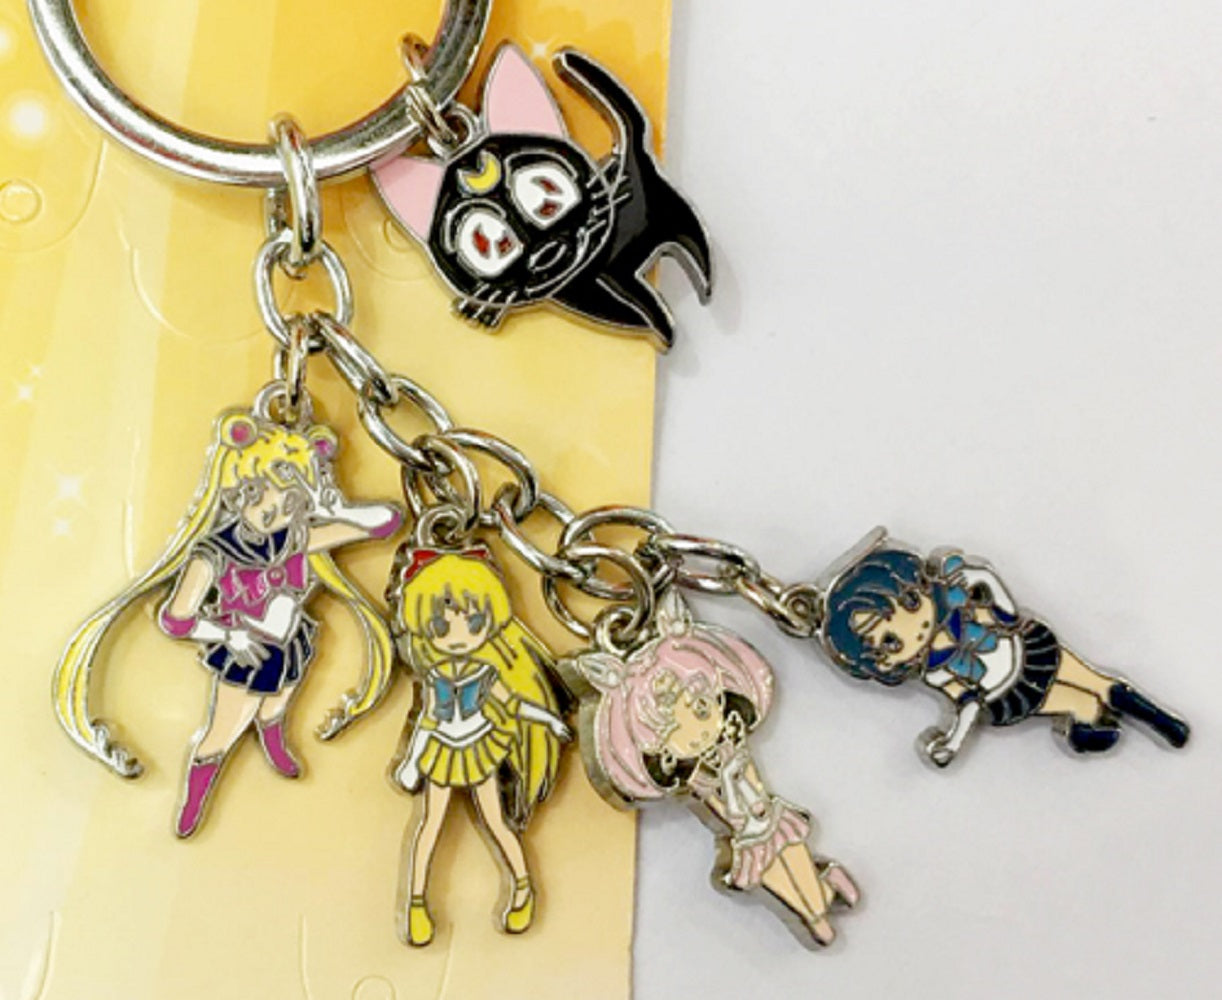 Sailor Moon Group Keychain #3 - Super Anime Store FREE SHIPPING FAST SHIPPING USA